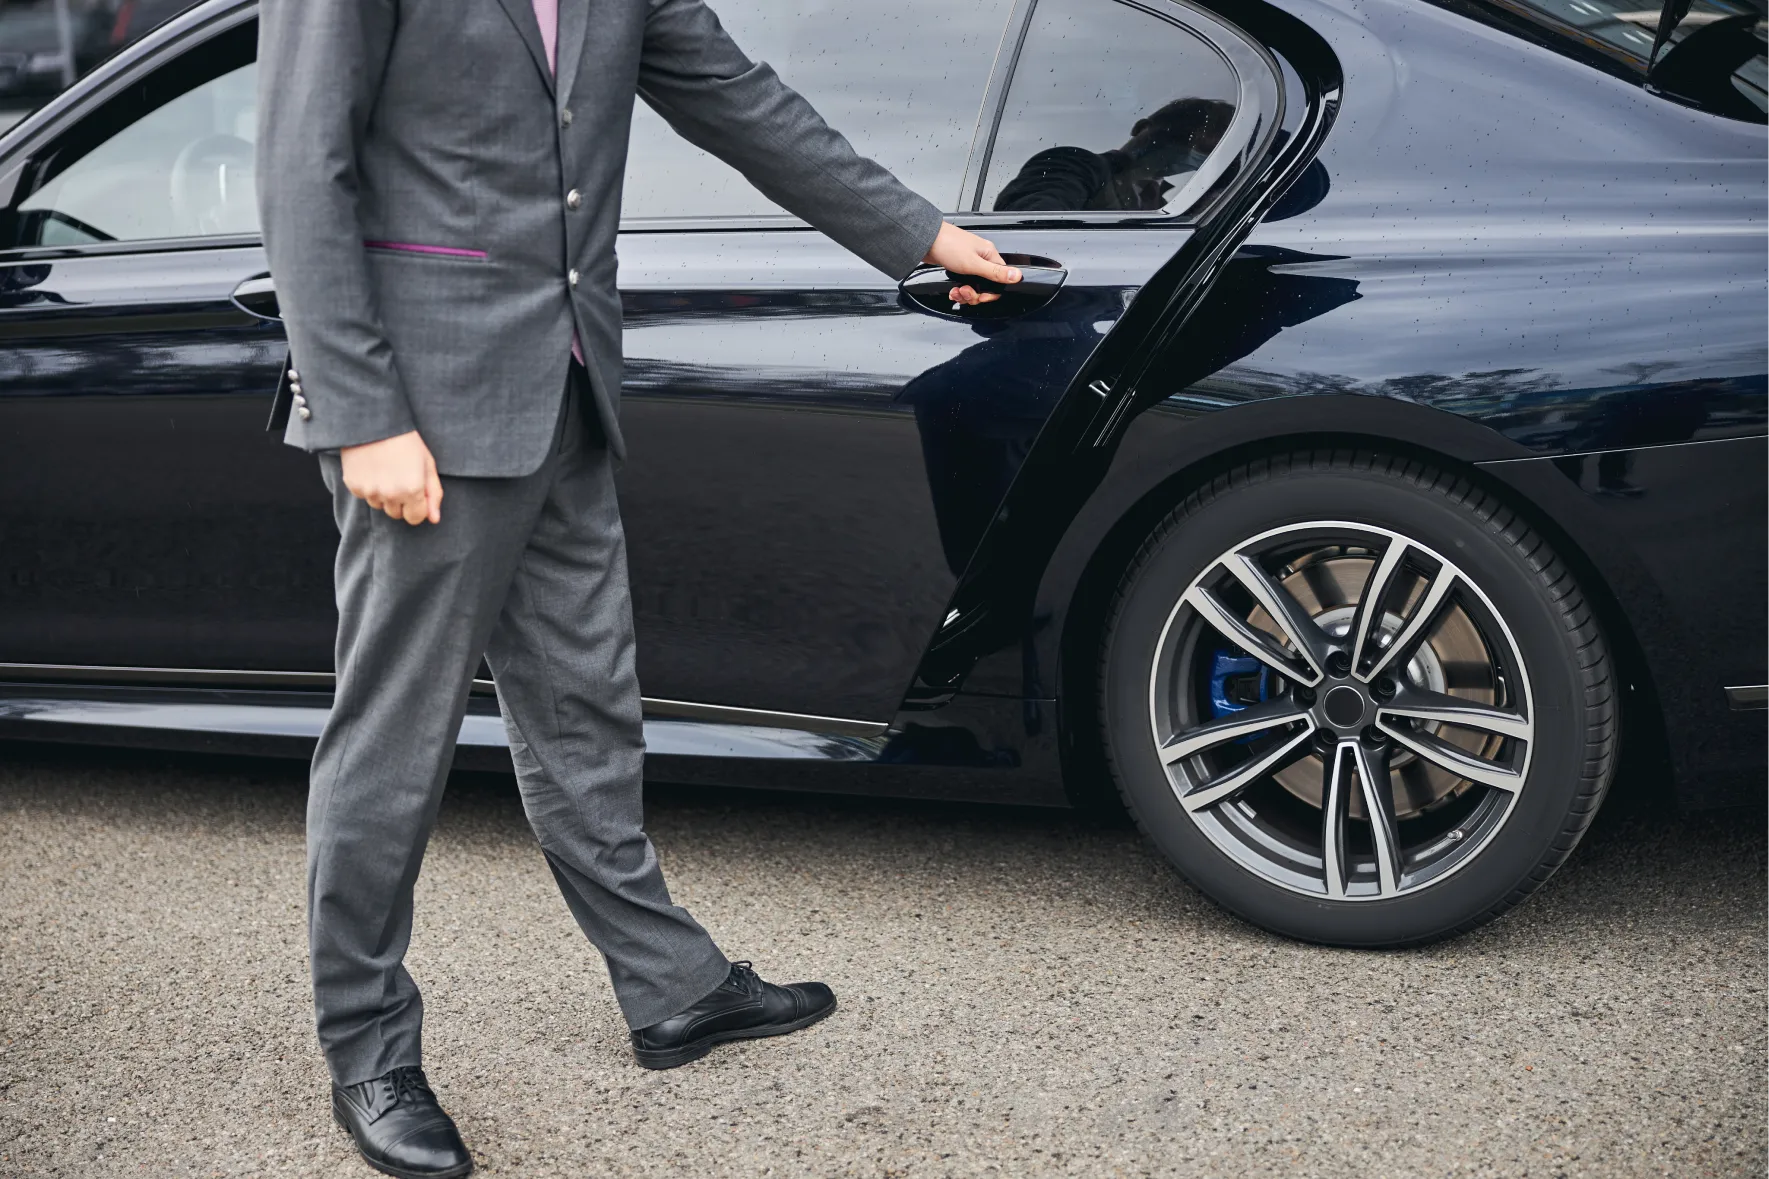 a man in a suit and tie walking towards a car